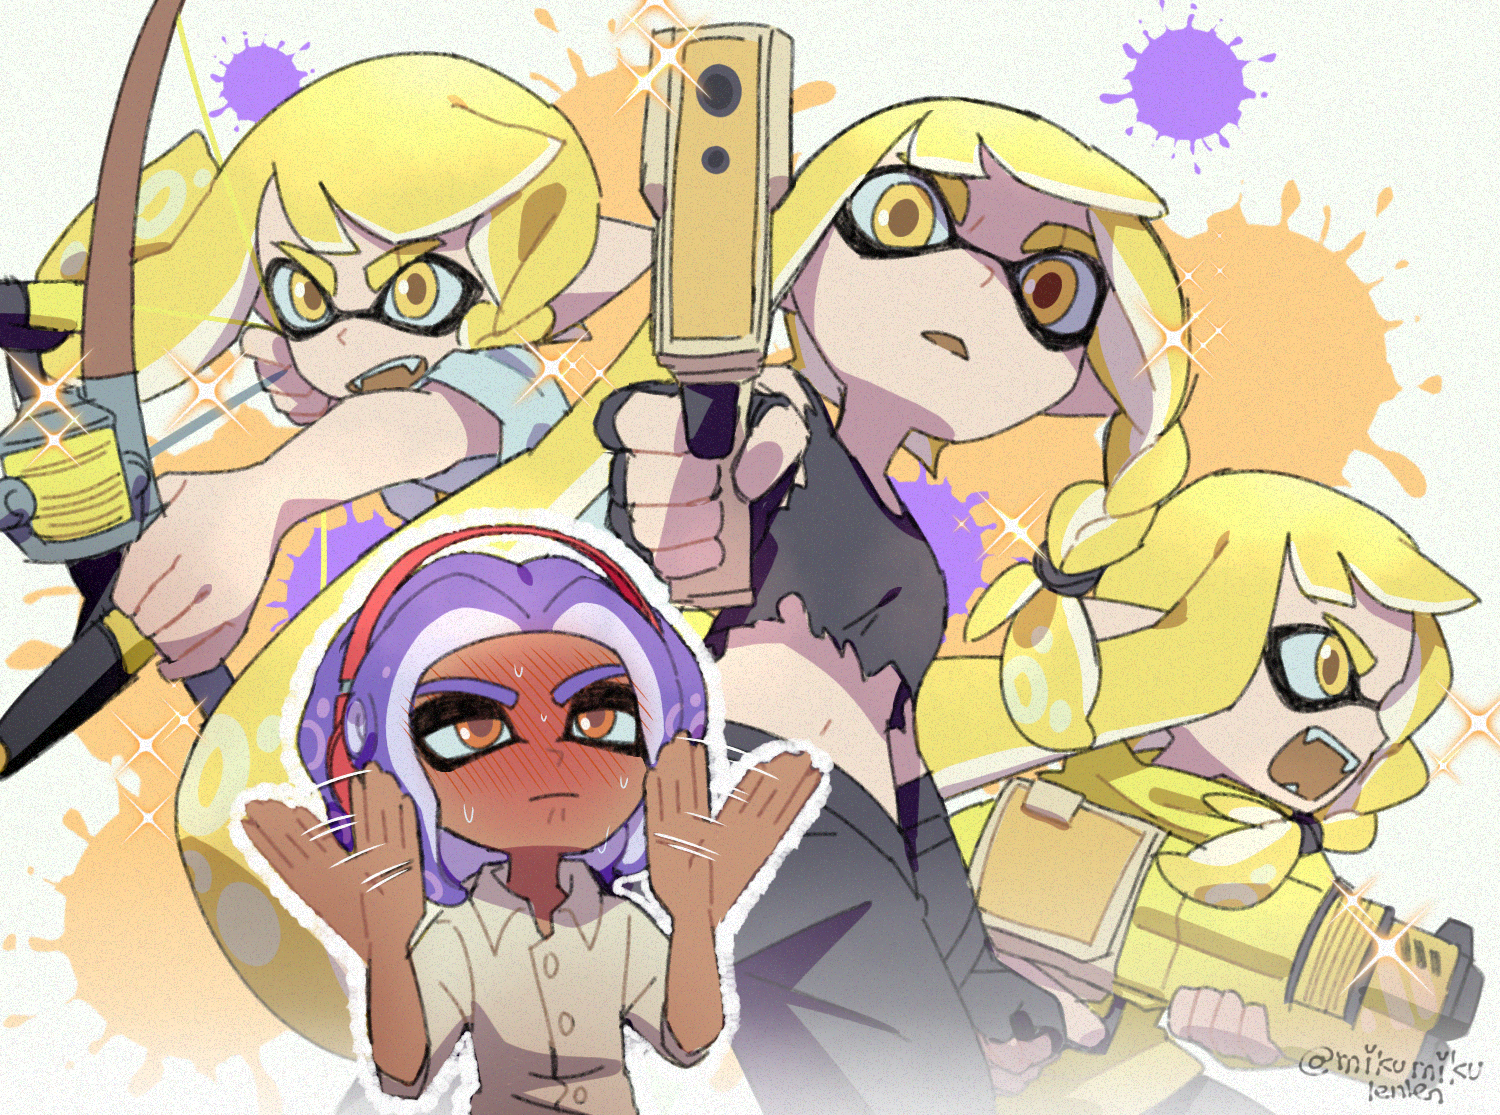 Agent 3 is very cute!